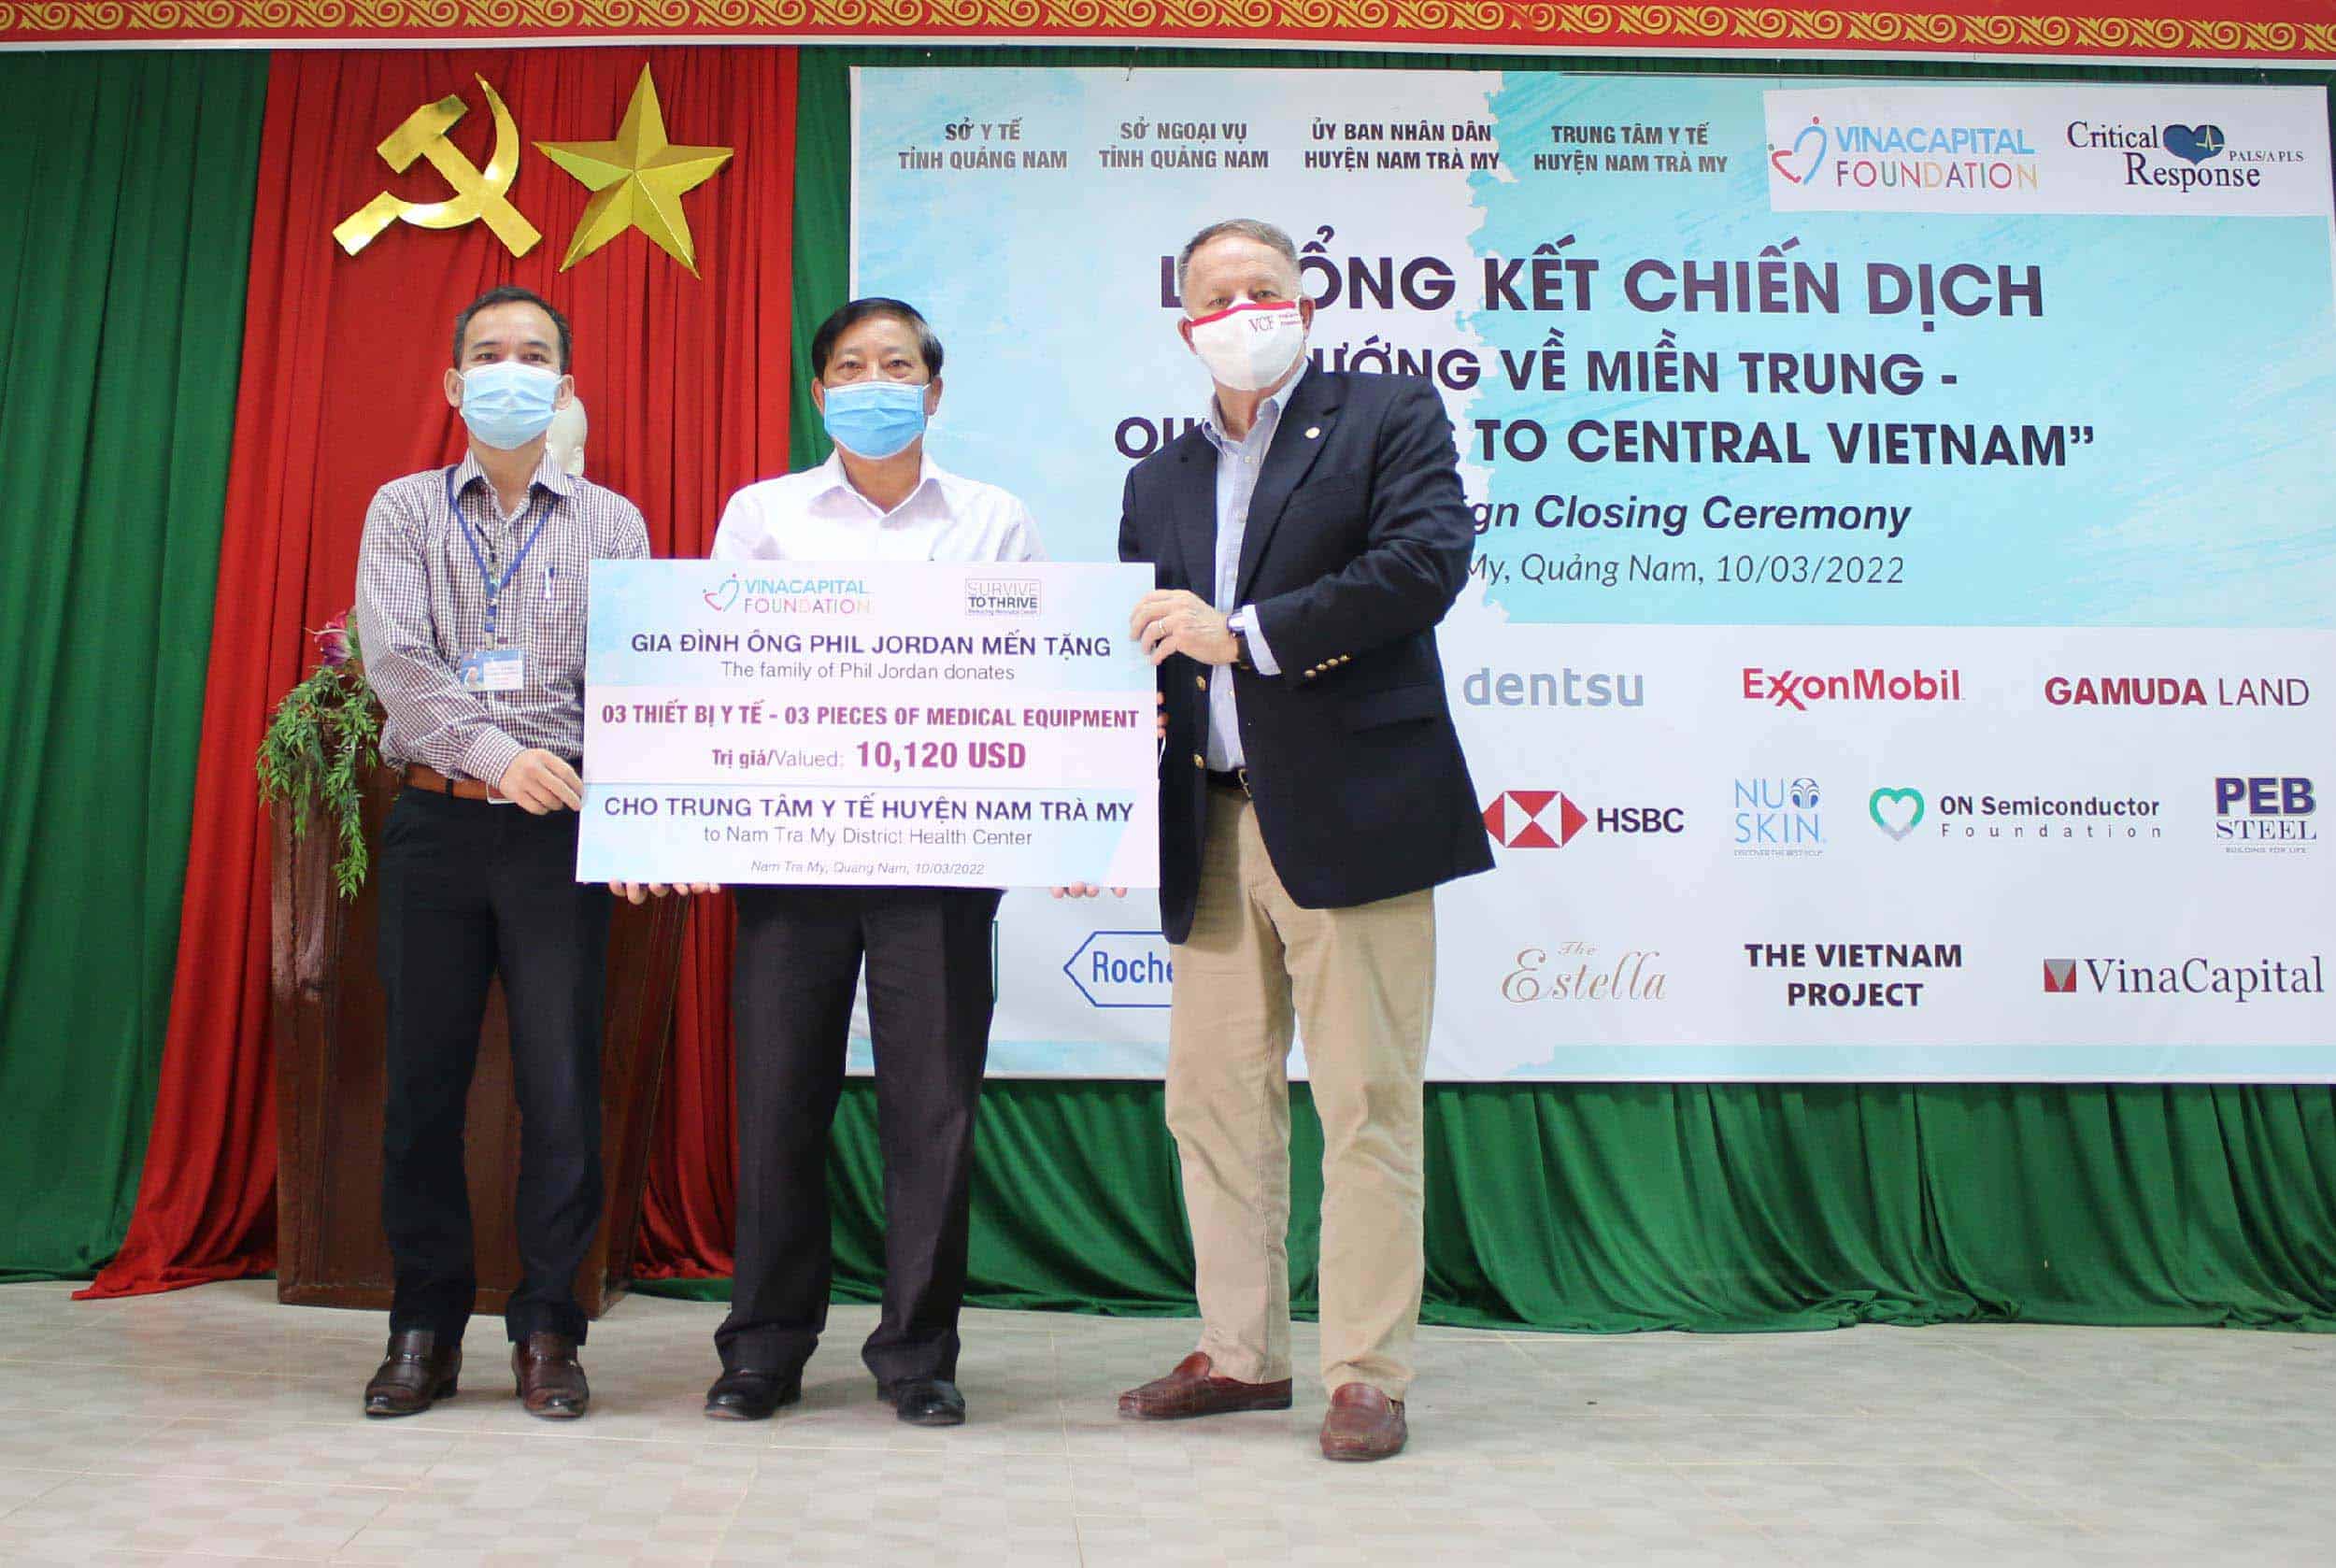 “Our Hearts To Central Vietnam” Campaign Closing Ceremony in Nam Tra My District, Quang Nam Province